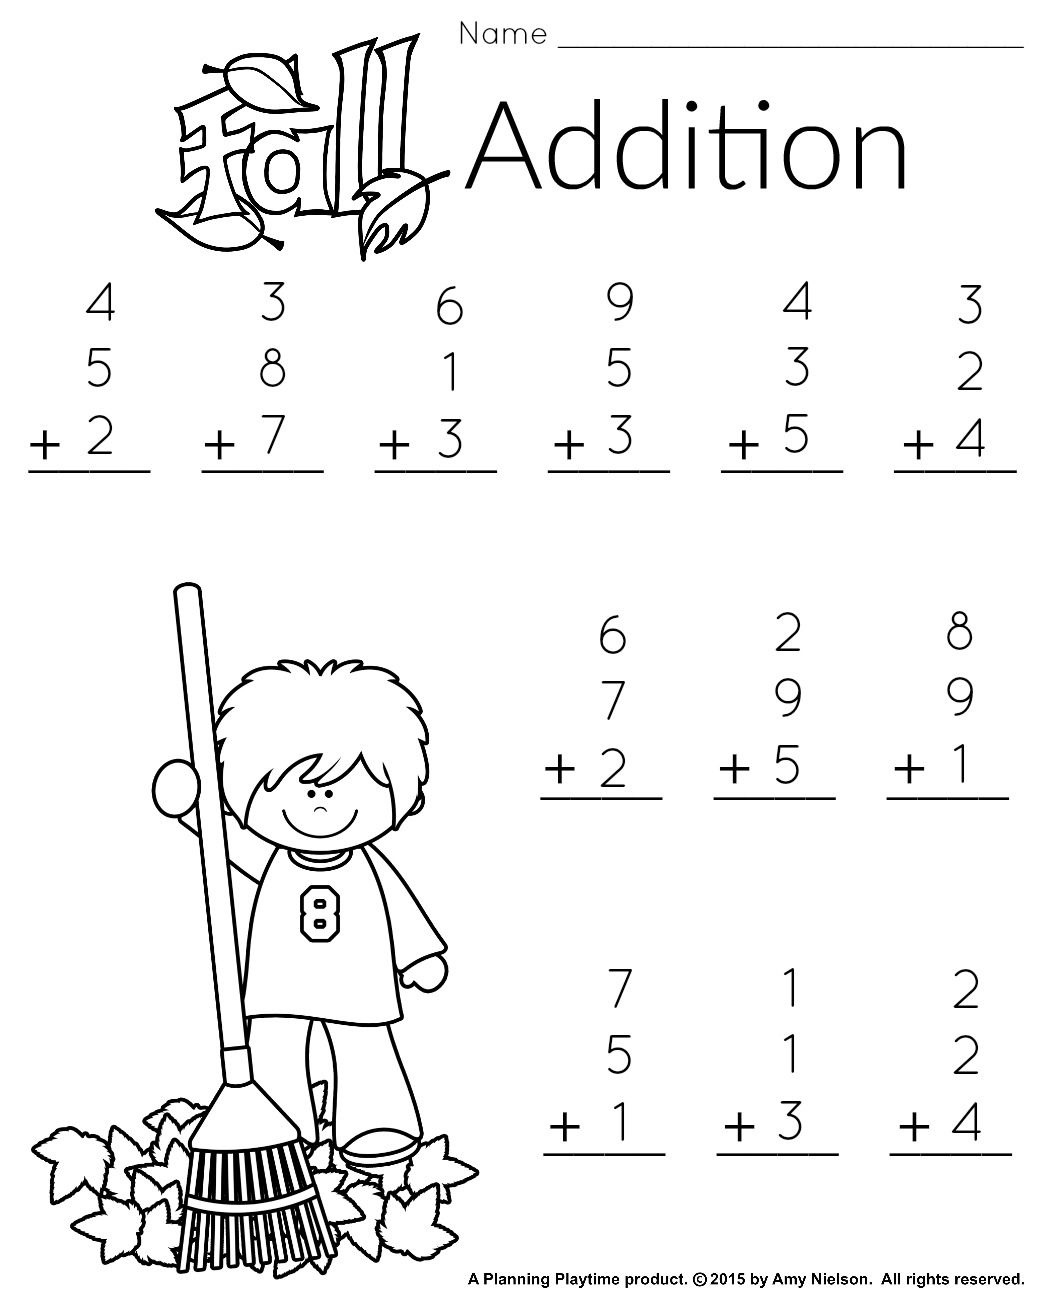 amazing-printable-worksheet-for-kids-about-count-and-tally-maths-learn